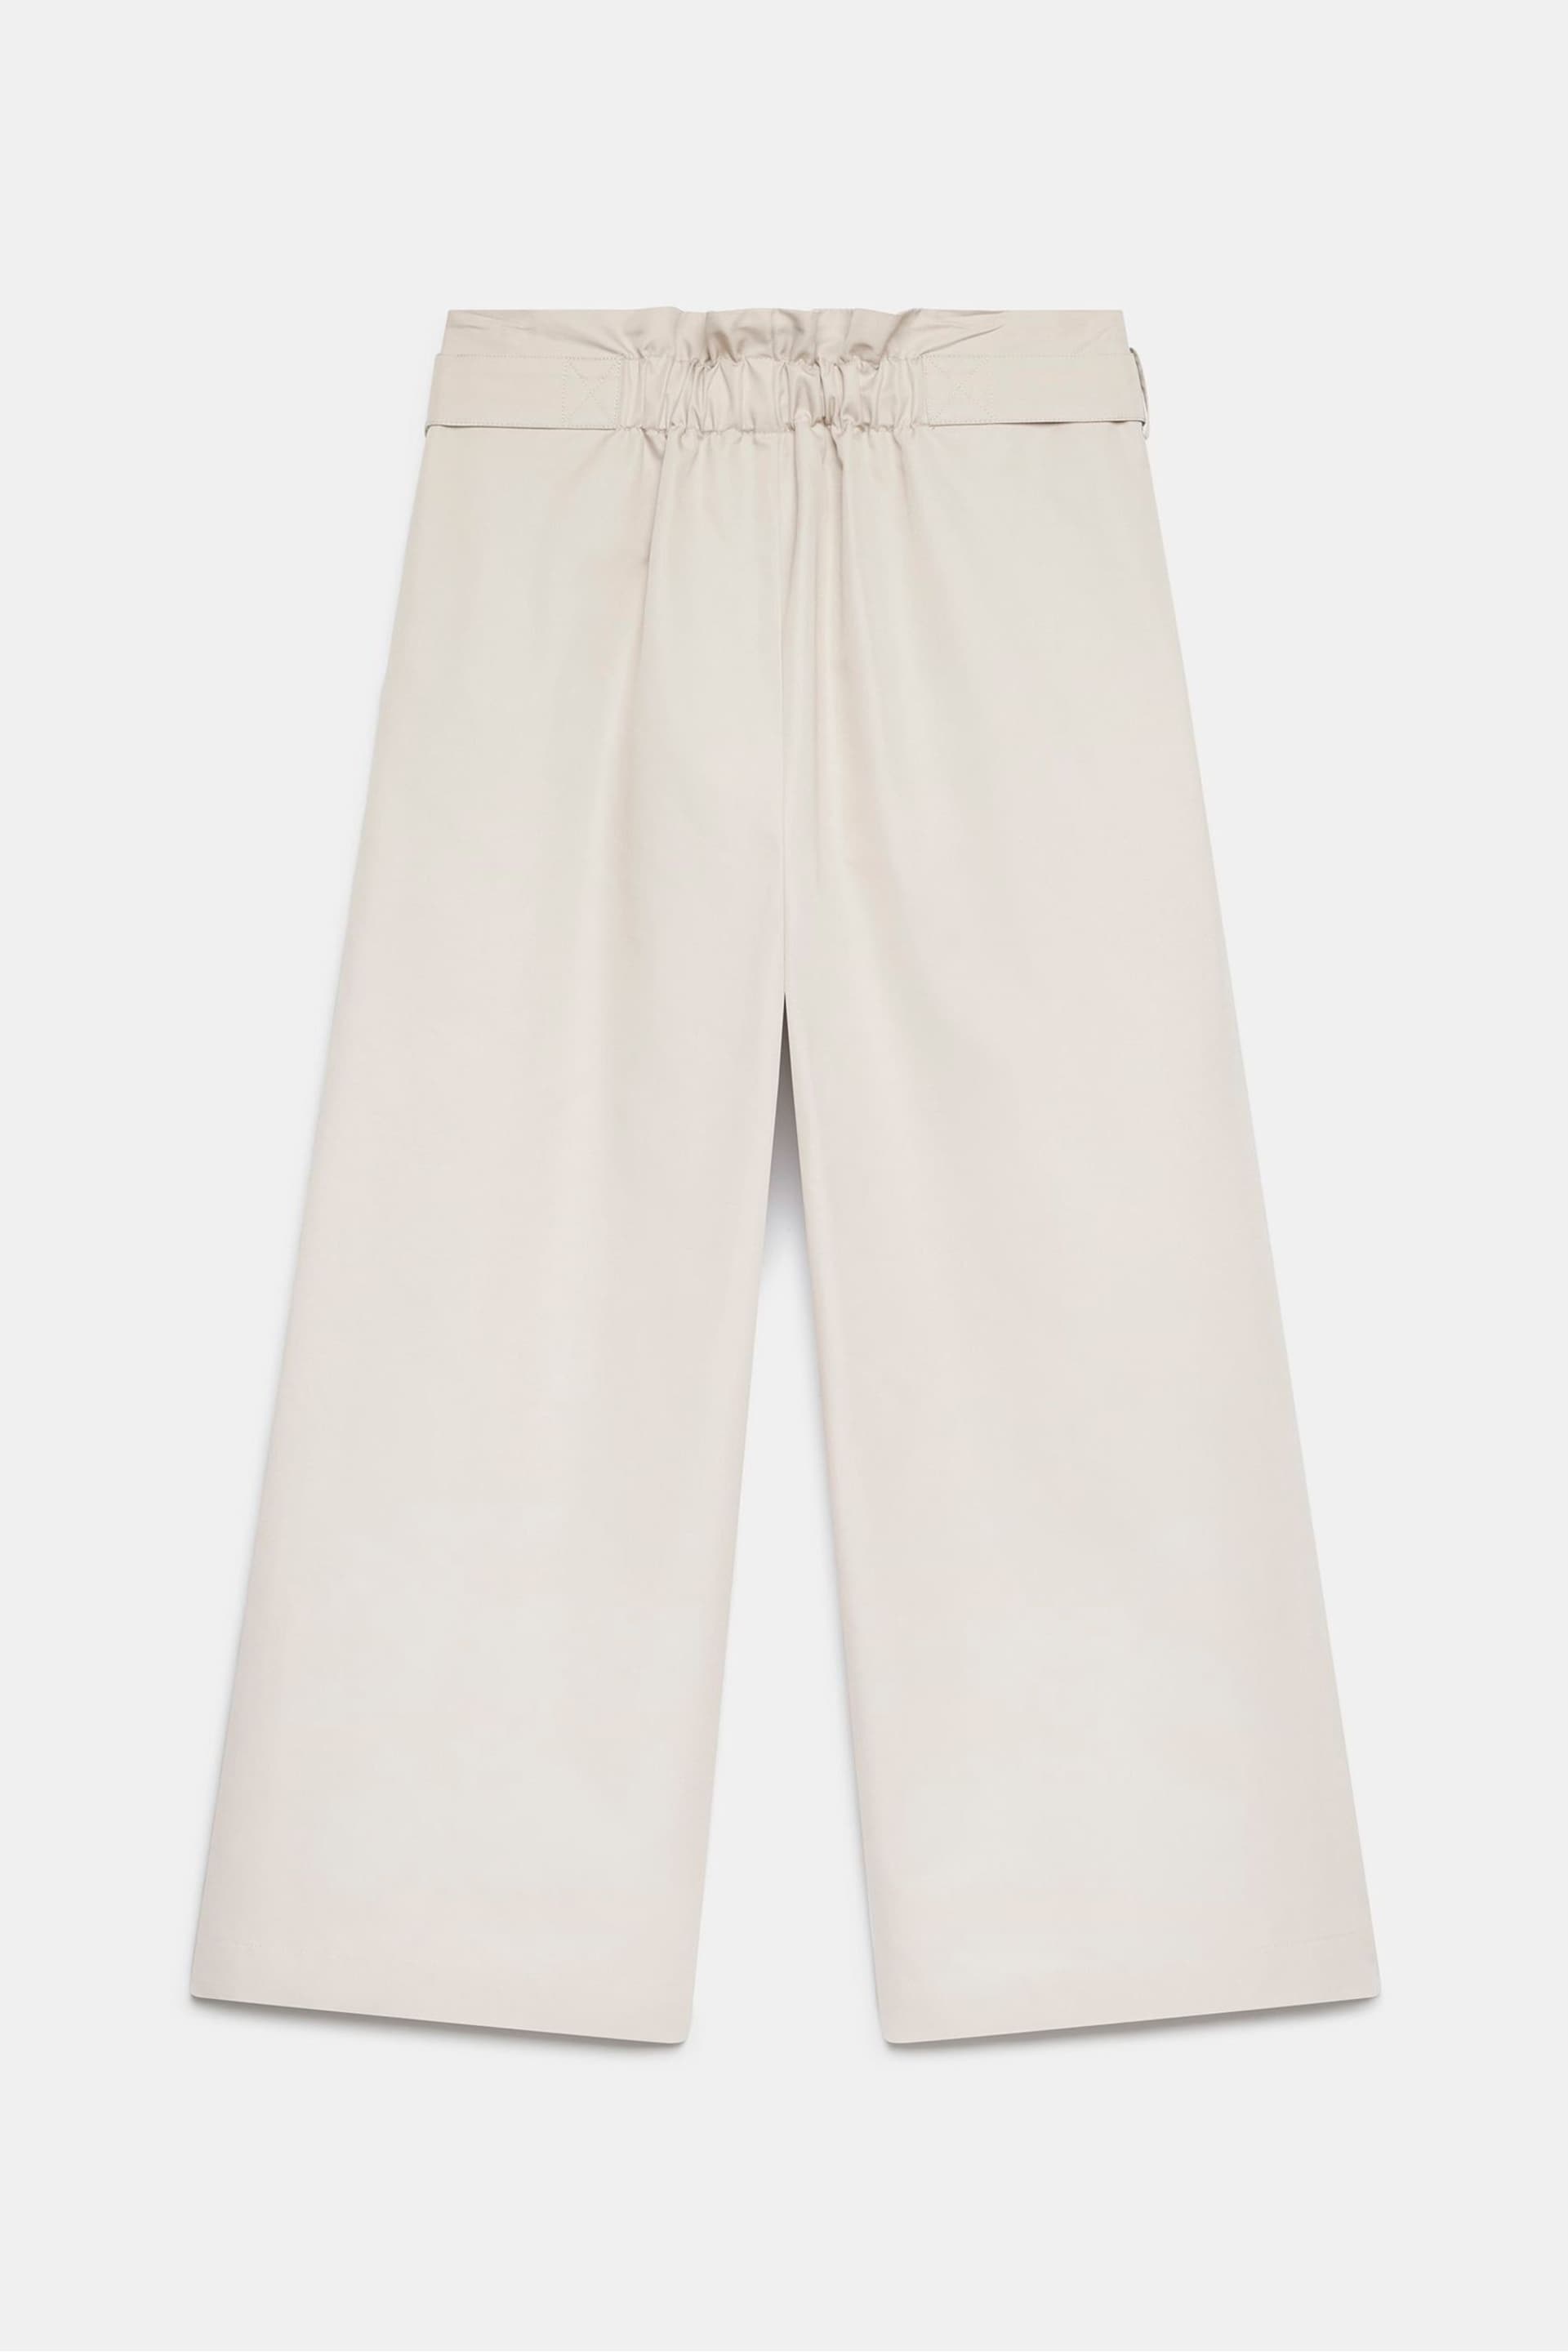 Mint Velvet Cream Jersey Stitch Detail Trousers - Image 5 of 6